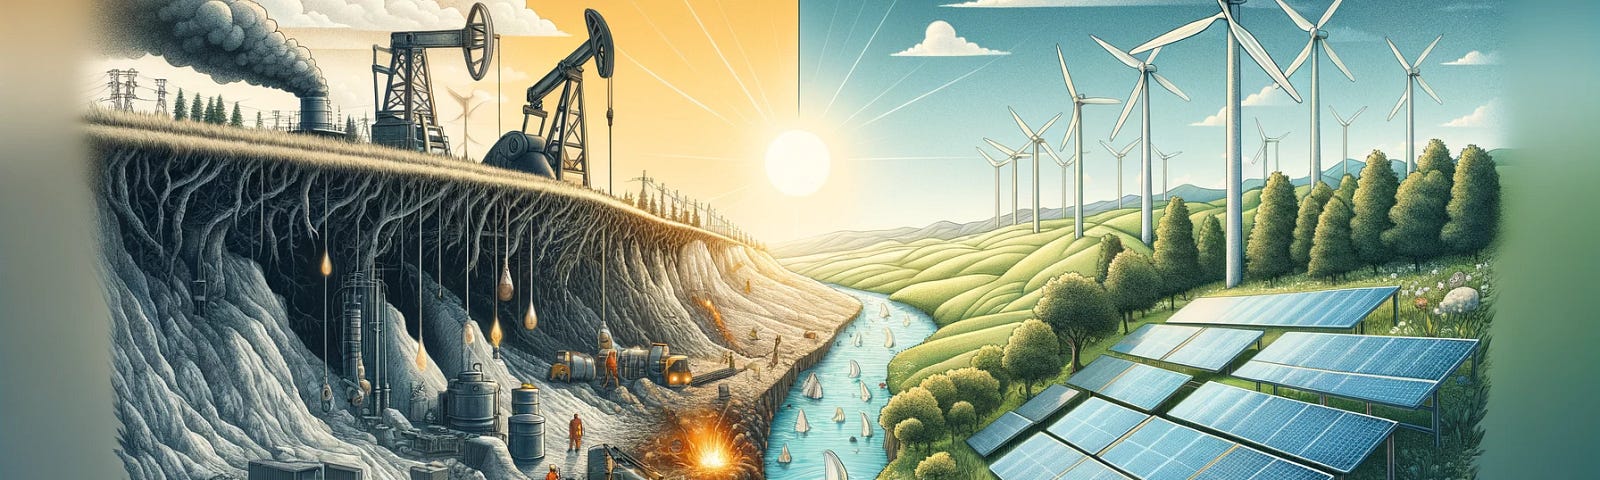 ChatGPT & DALL-E generated panoramic illustration contrasting human efforts in energy extraction with nature’s effortless energy production.